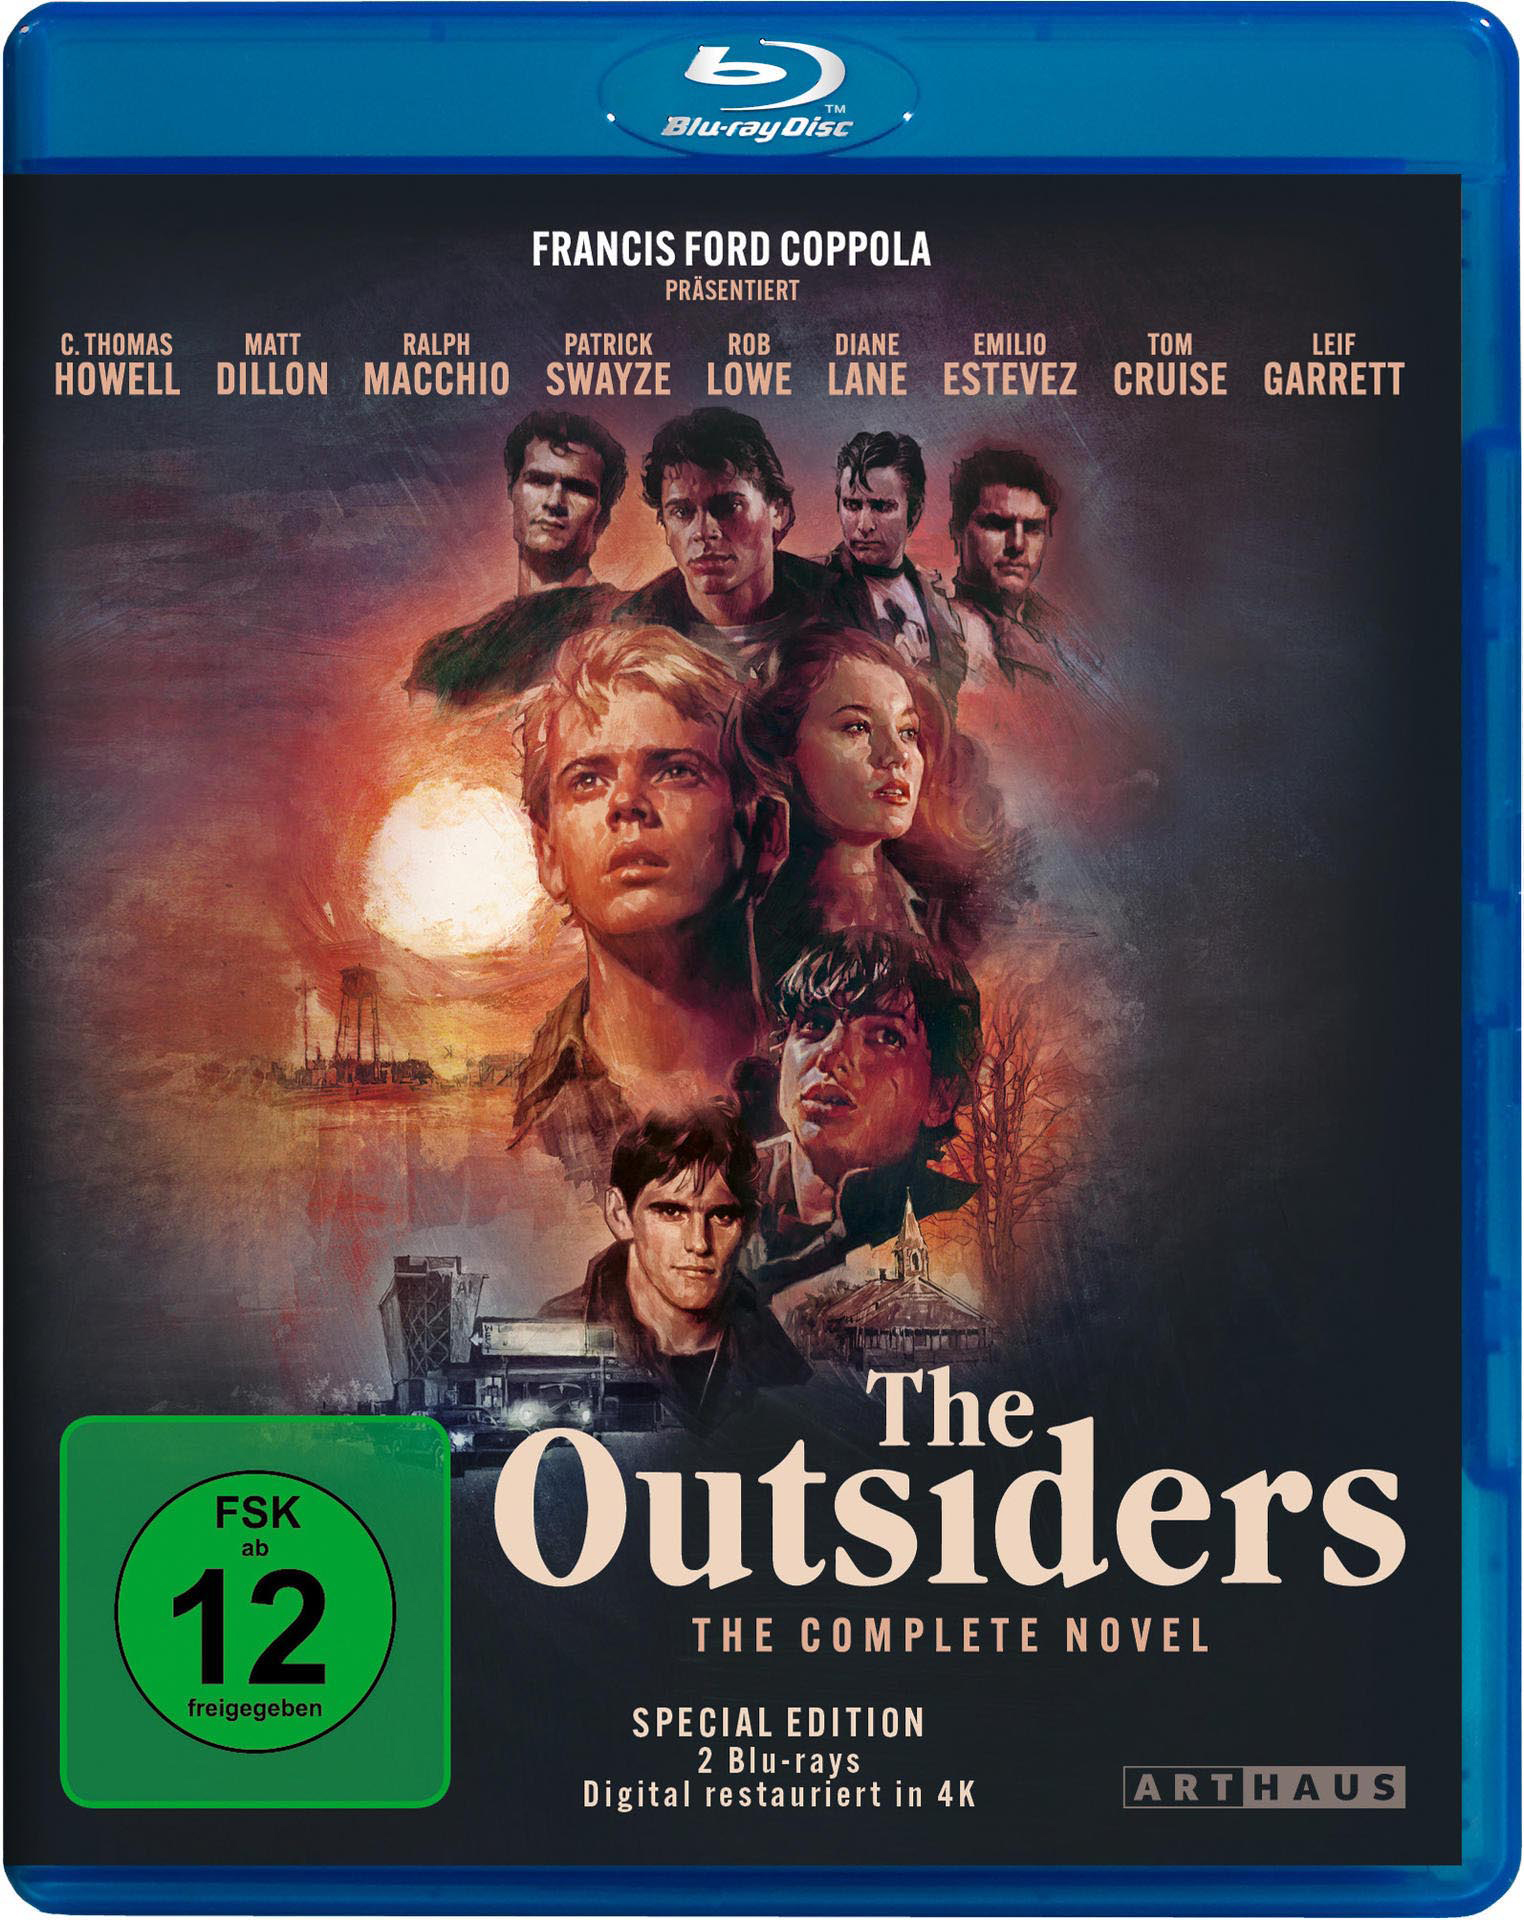 The Outsiders Blu-ray